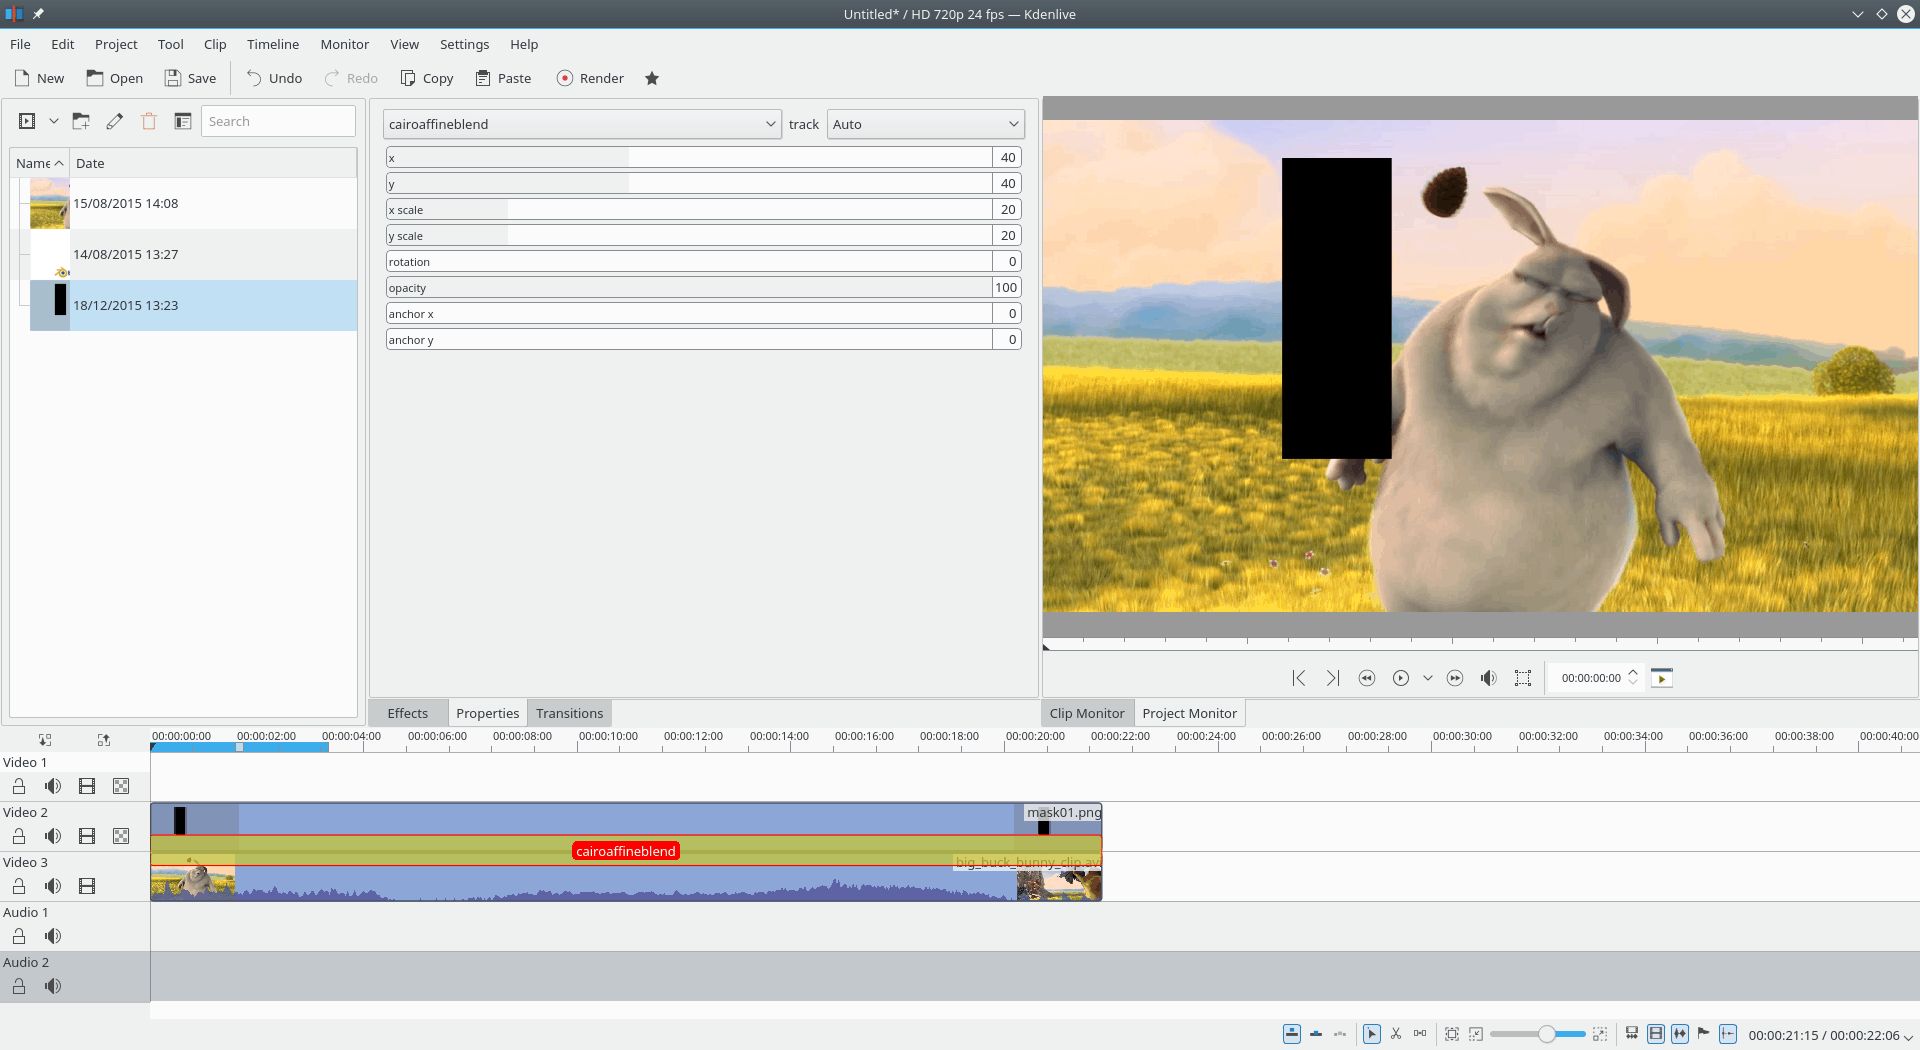 Make sure the mask clip is in a track above the movie clip and pull it so it is as long as the movie clip. Combine both clips with a cairoaffineblend transition.